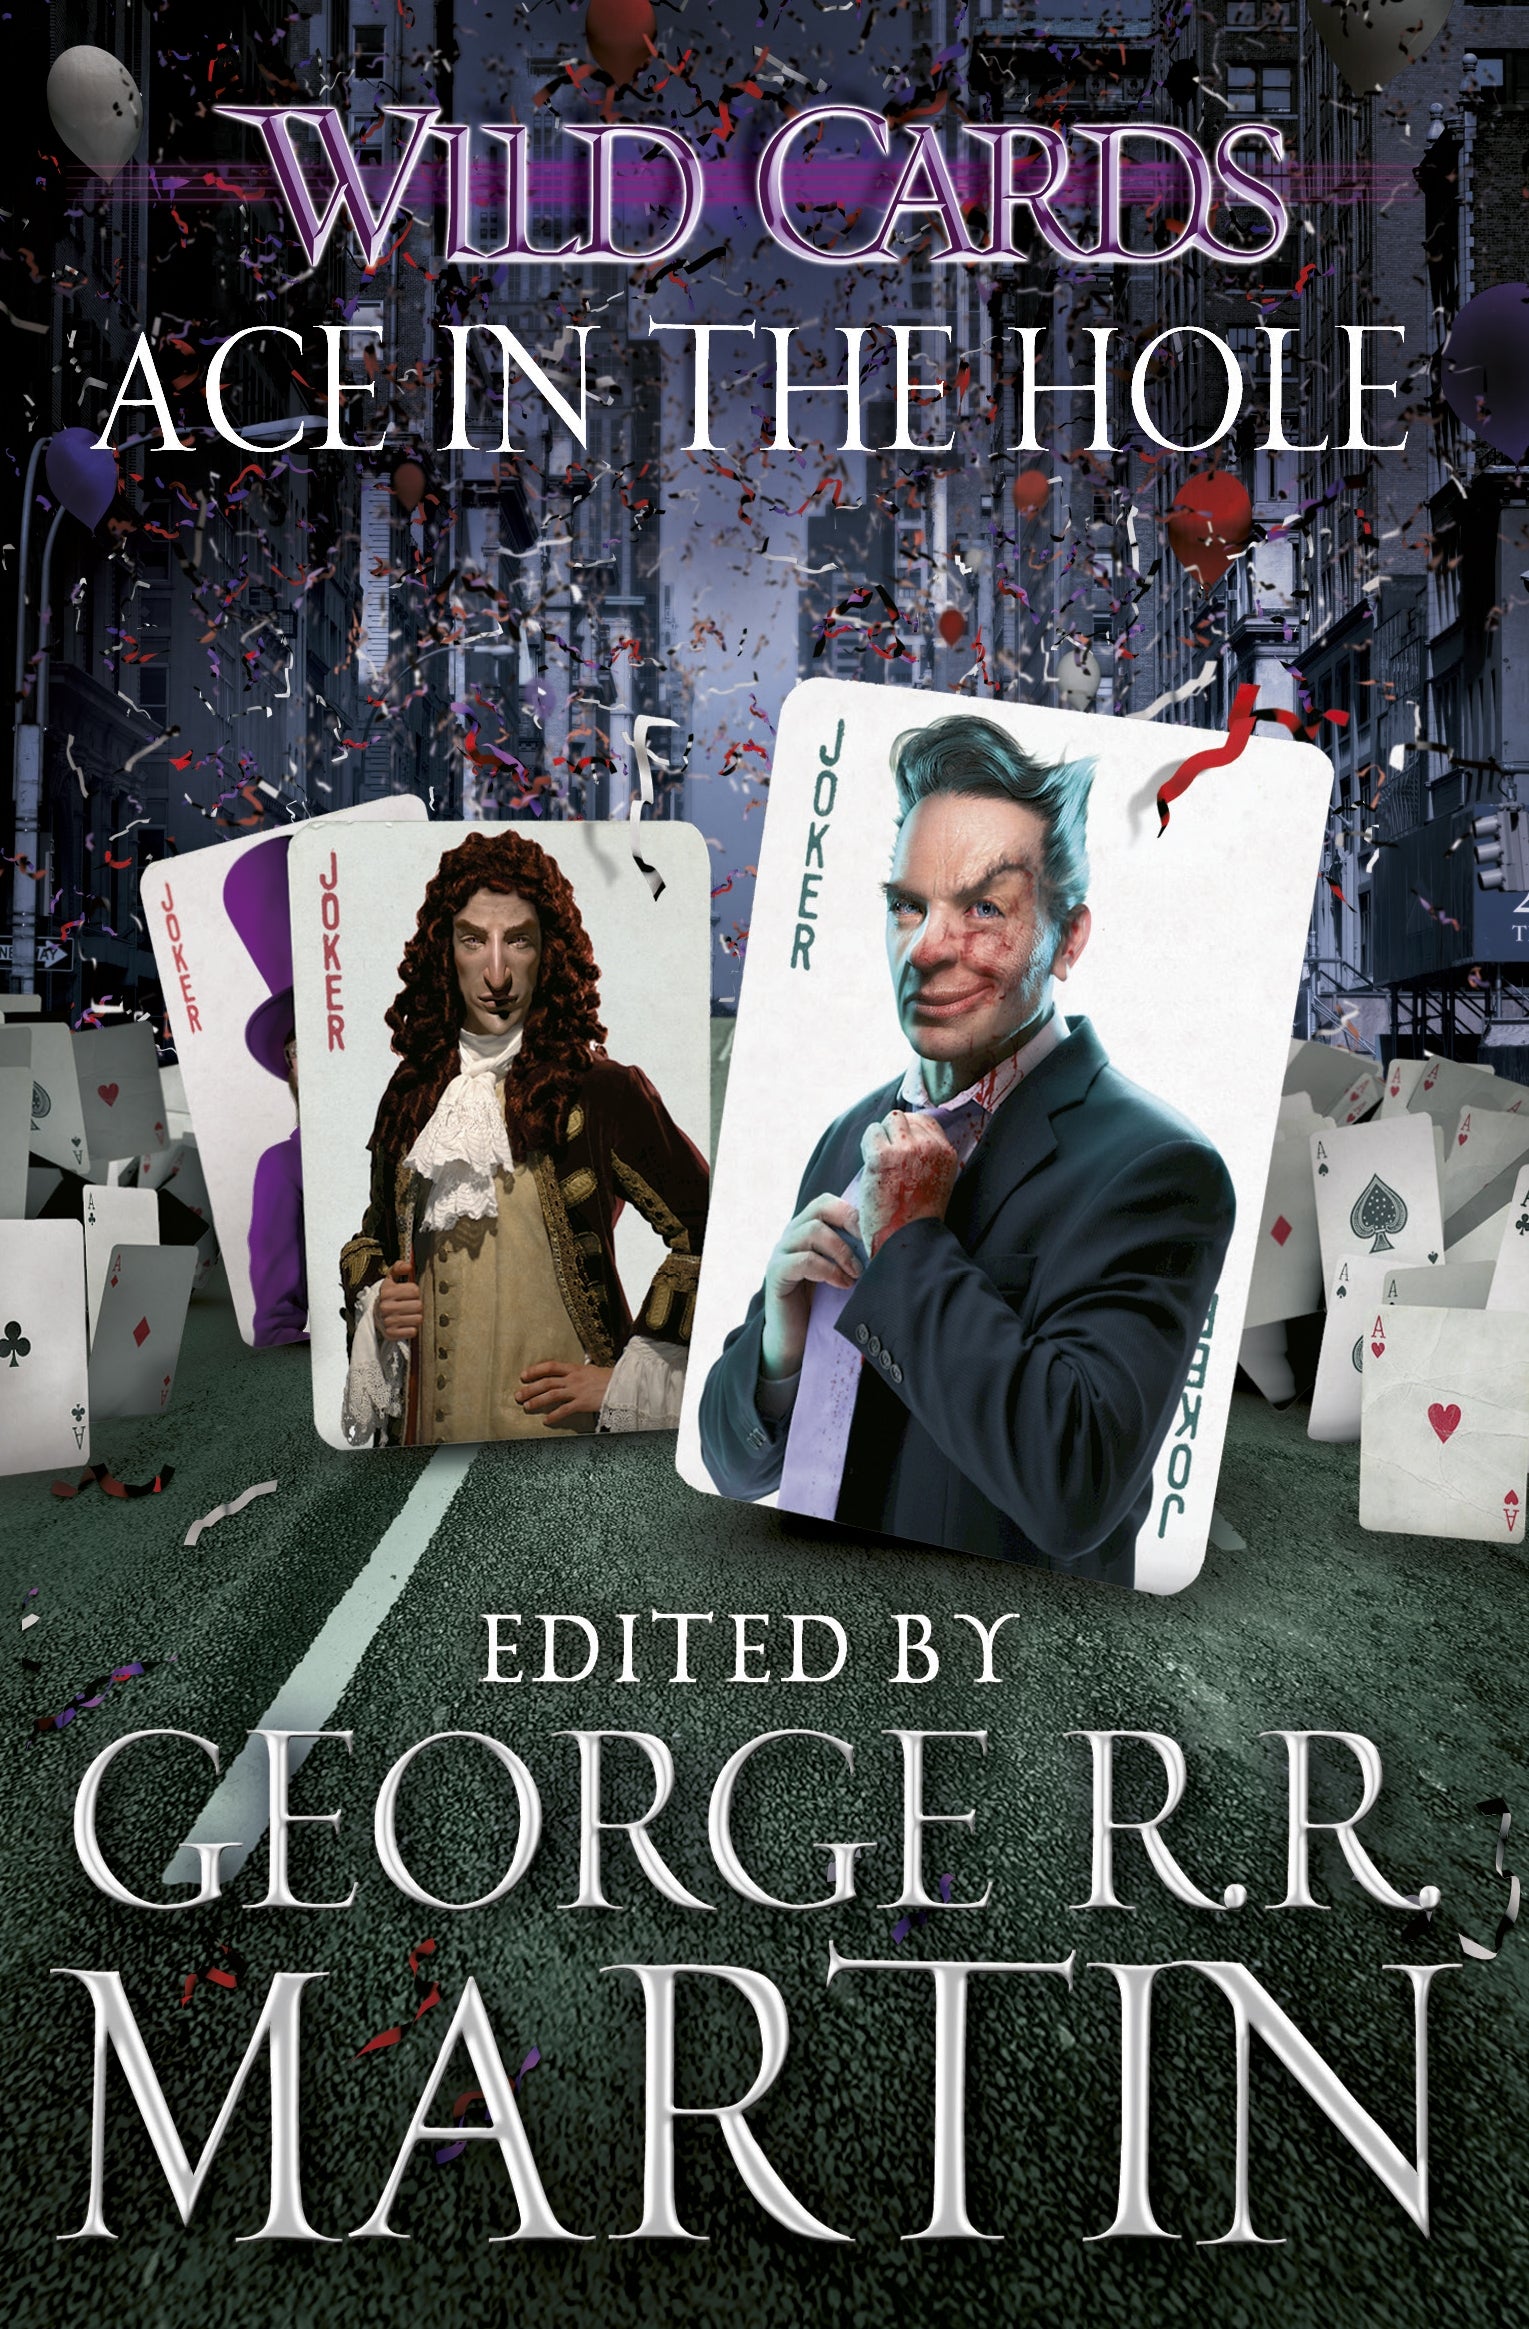 Wild Cards: Ace in the Hole by George R.R. Martin